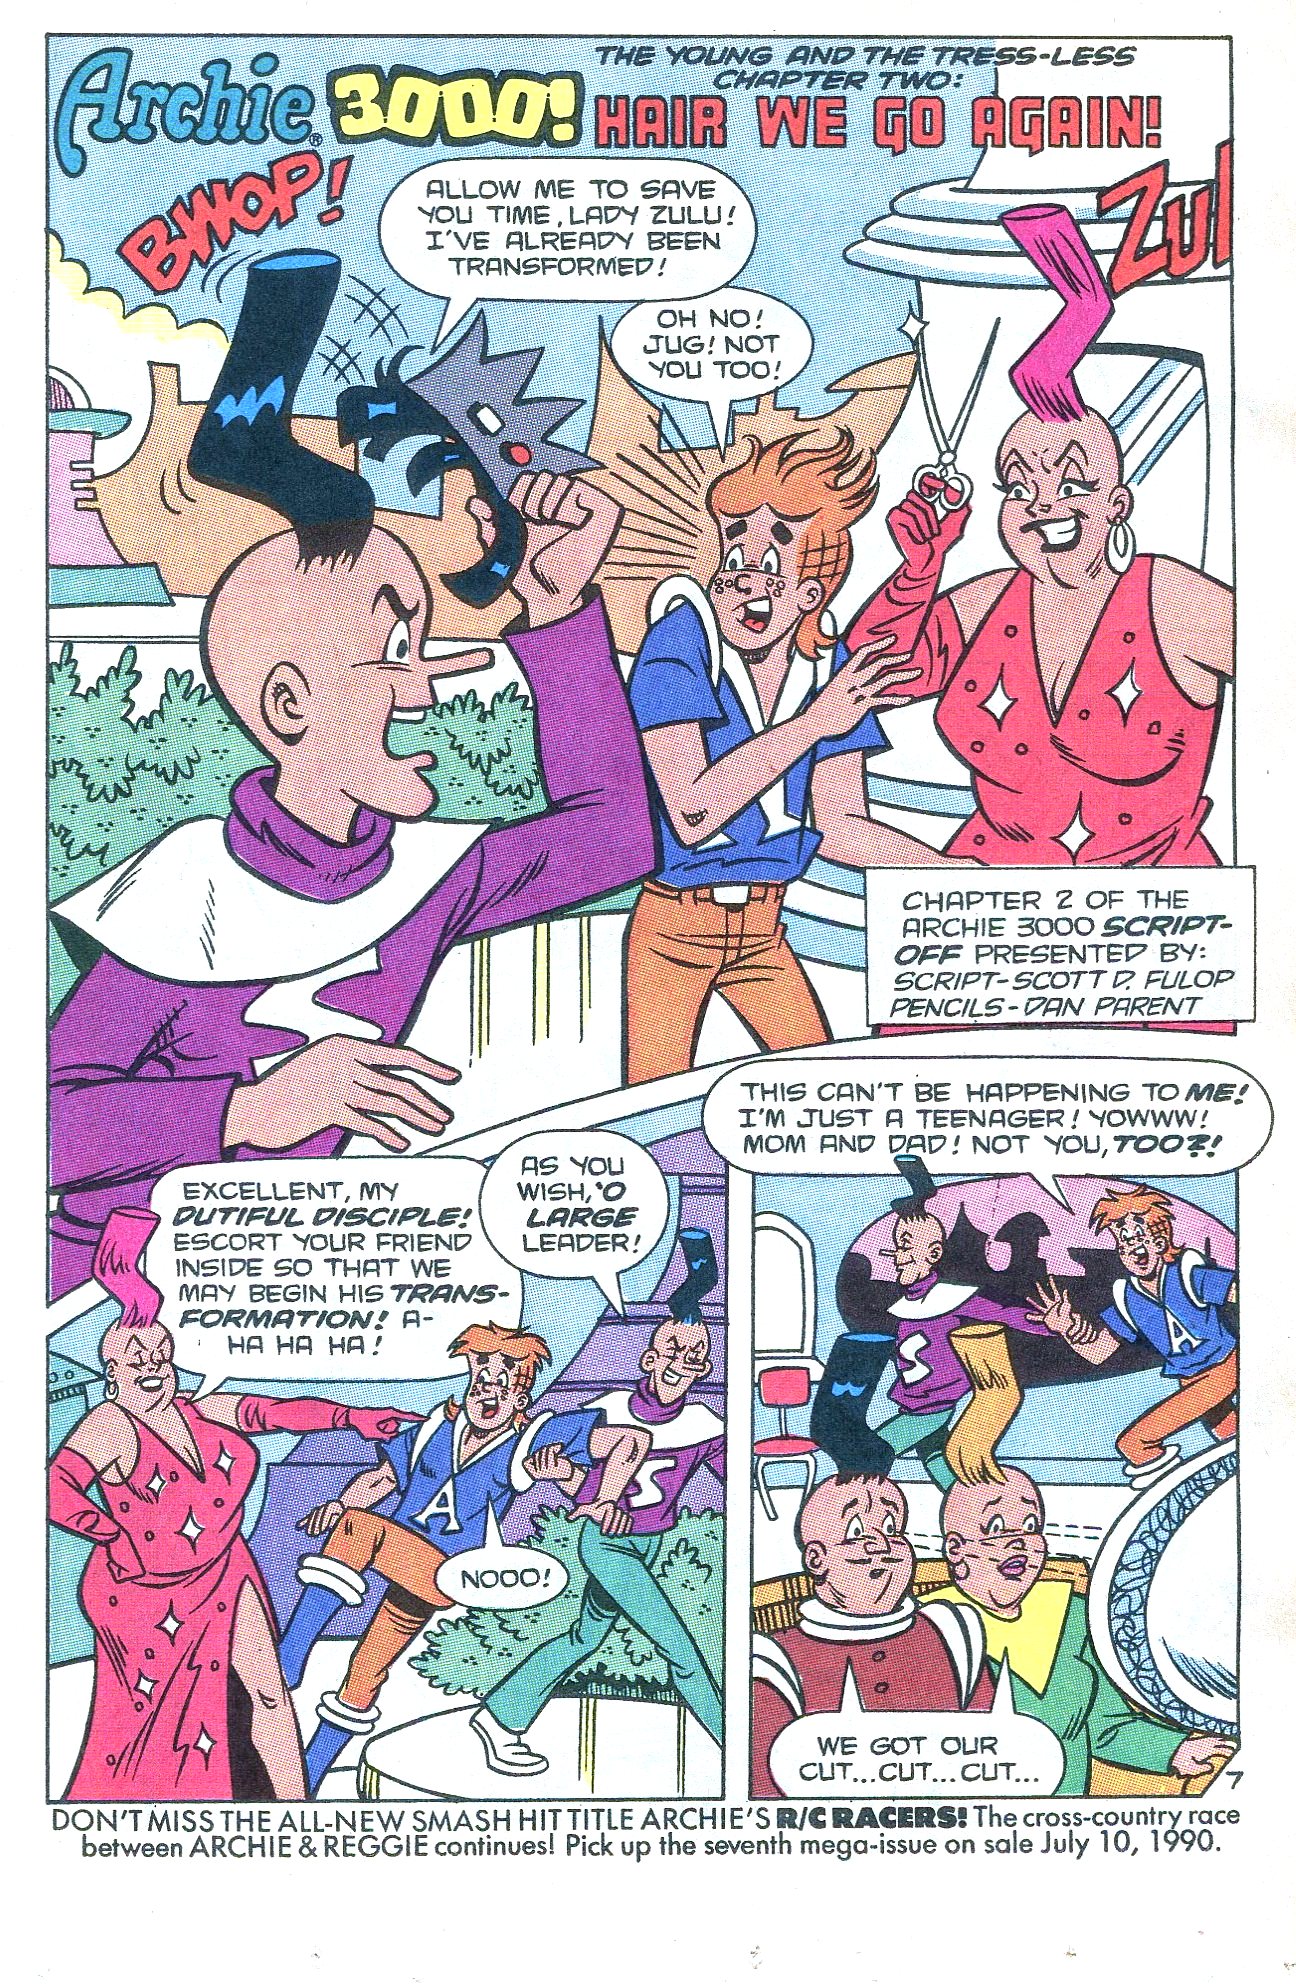 Read online Archie 3000! (1989) comic -  Issue #11 - 13